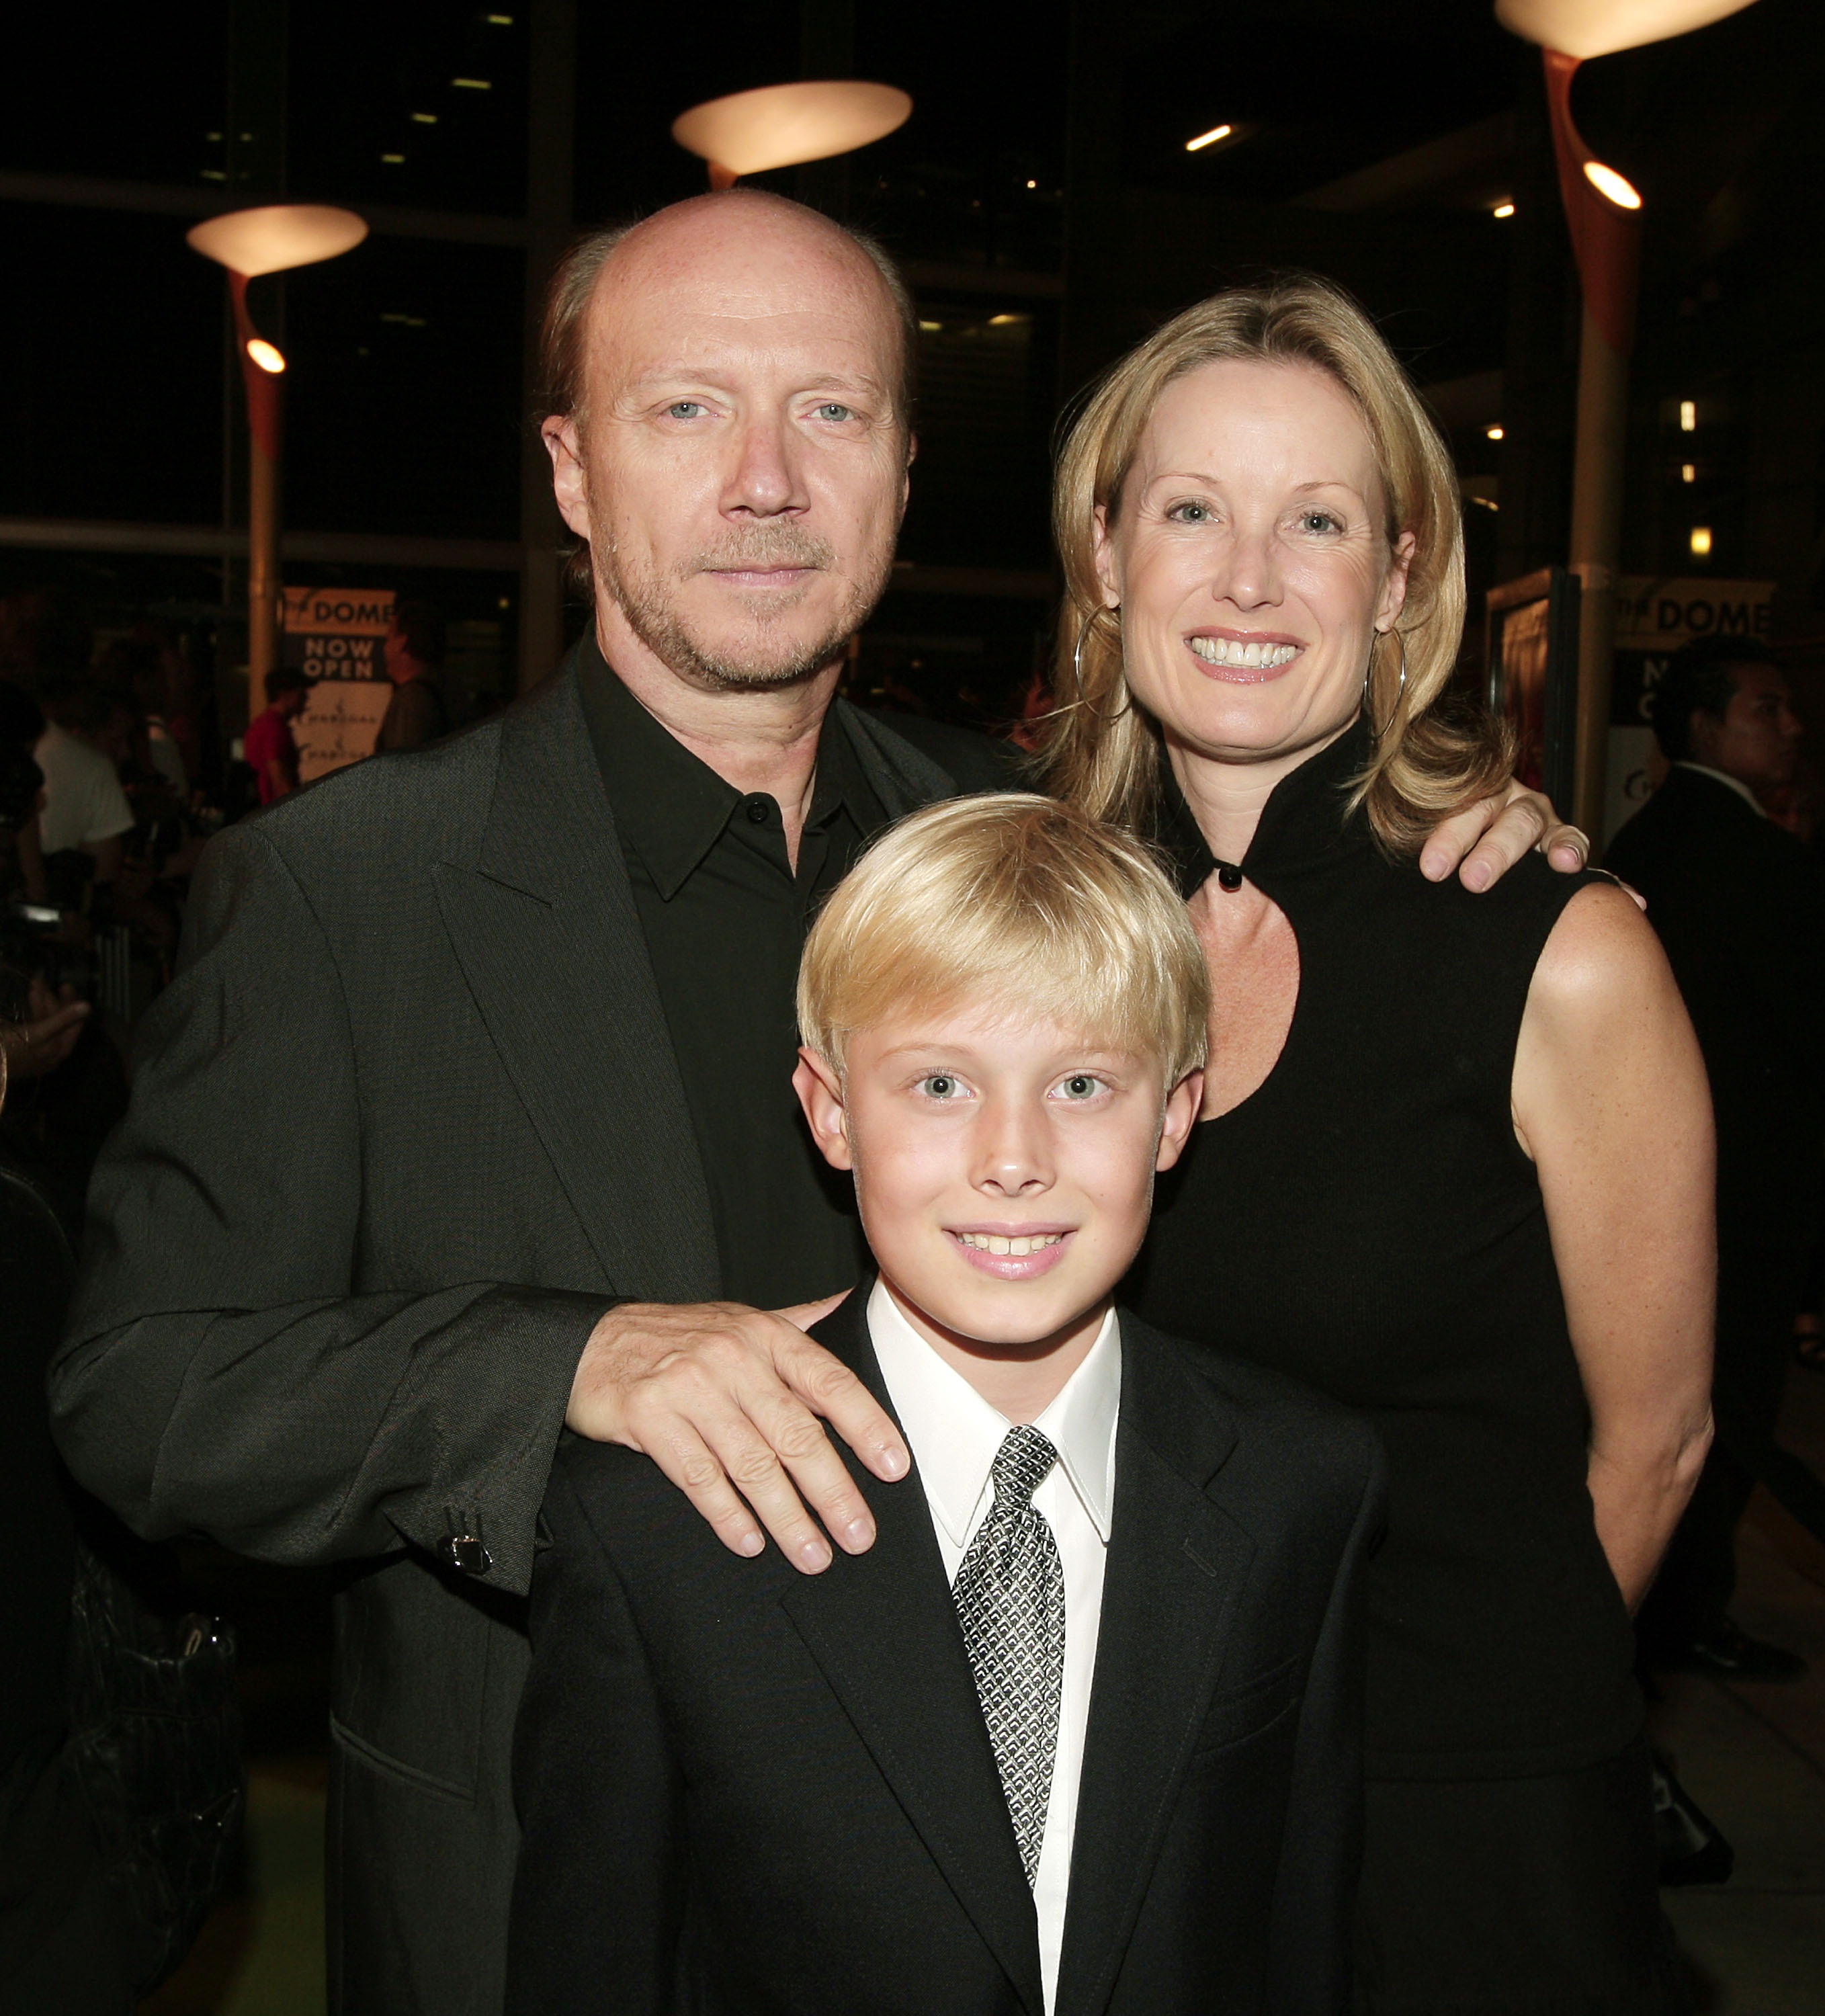 Paul Haggis, Deborah Rennard, and their son James Haggis at the premiere of "In the Valley of Elah" on September 13, 2007, in Los Angeles, California | Source: Getty Images